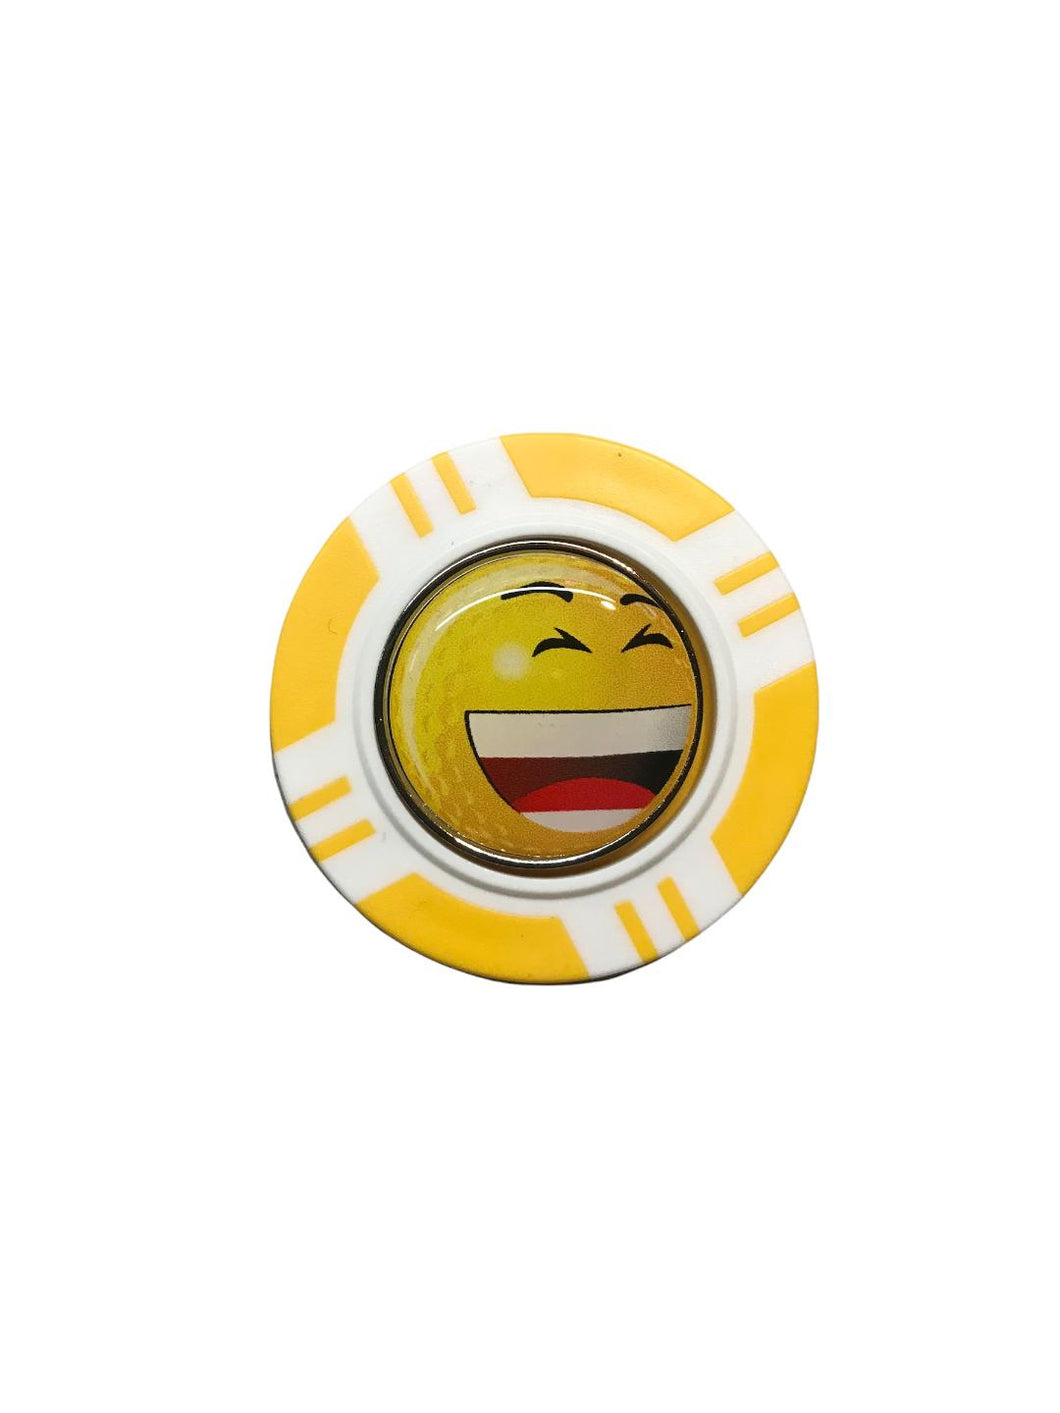 Vegas Poker Chip Golf Ball Marker. Yellow Laugh, Wink, Smile, Crazy or Angry.